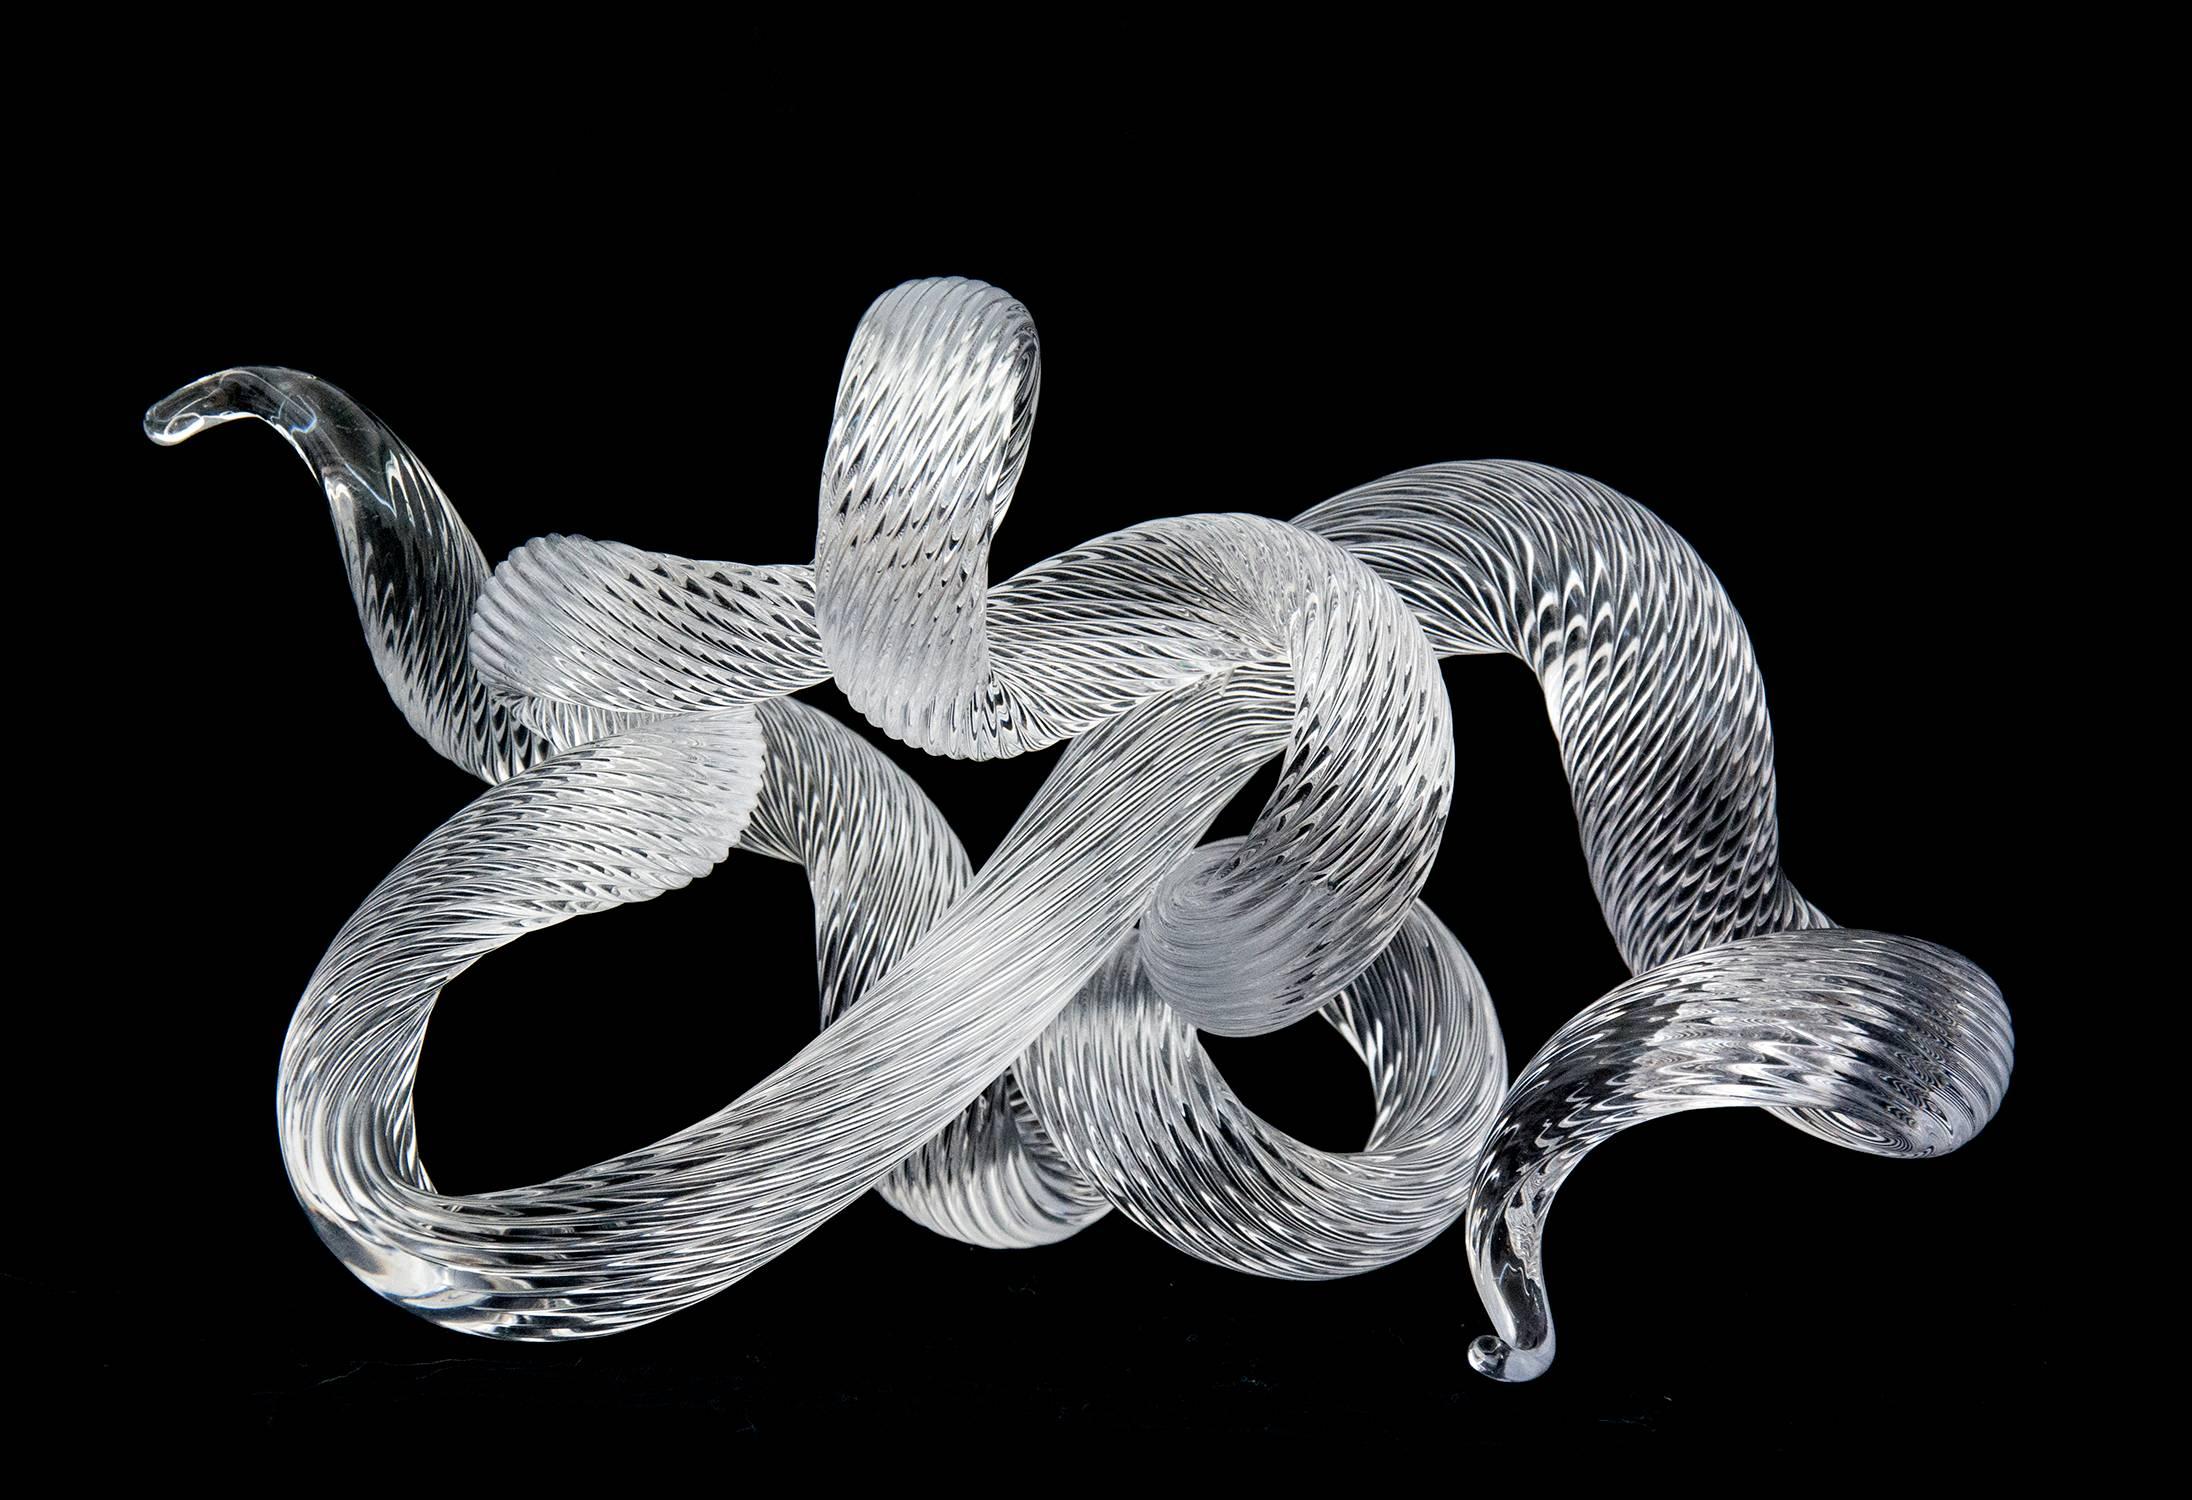 A single rod of translucent and striated clear glass is looped, twisted and shaped into an elegant wave by artist John Paul Robinson. The curated design is enhanced by light that sparkles on the complex surfaces of the glass.

Robinson was educated